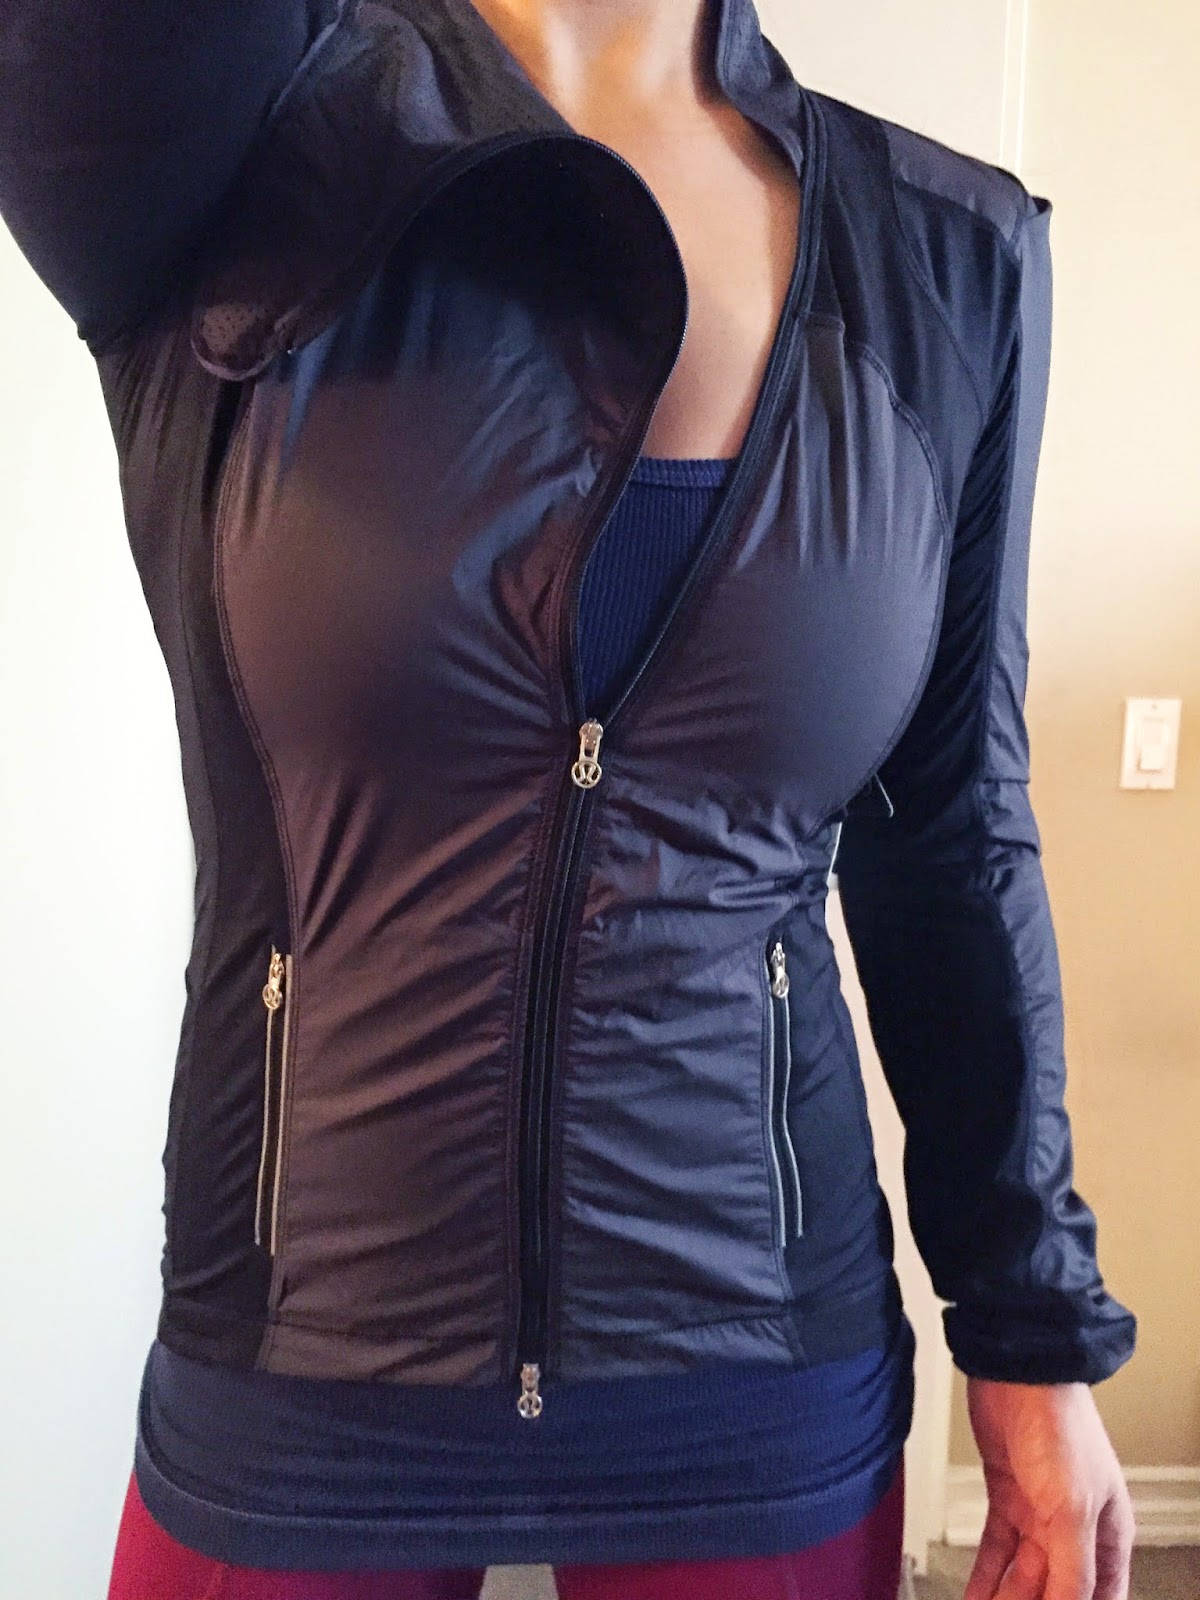 My Superficial Endeavors: My Latest Lululemon Purchases